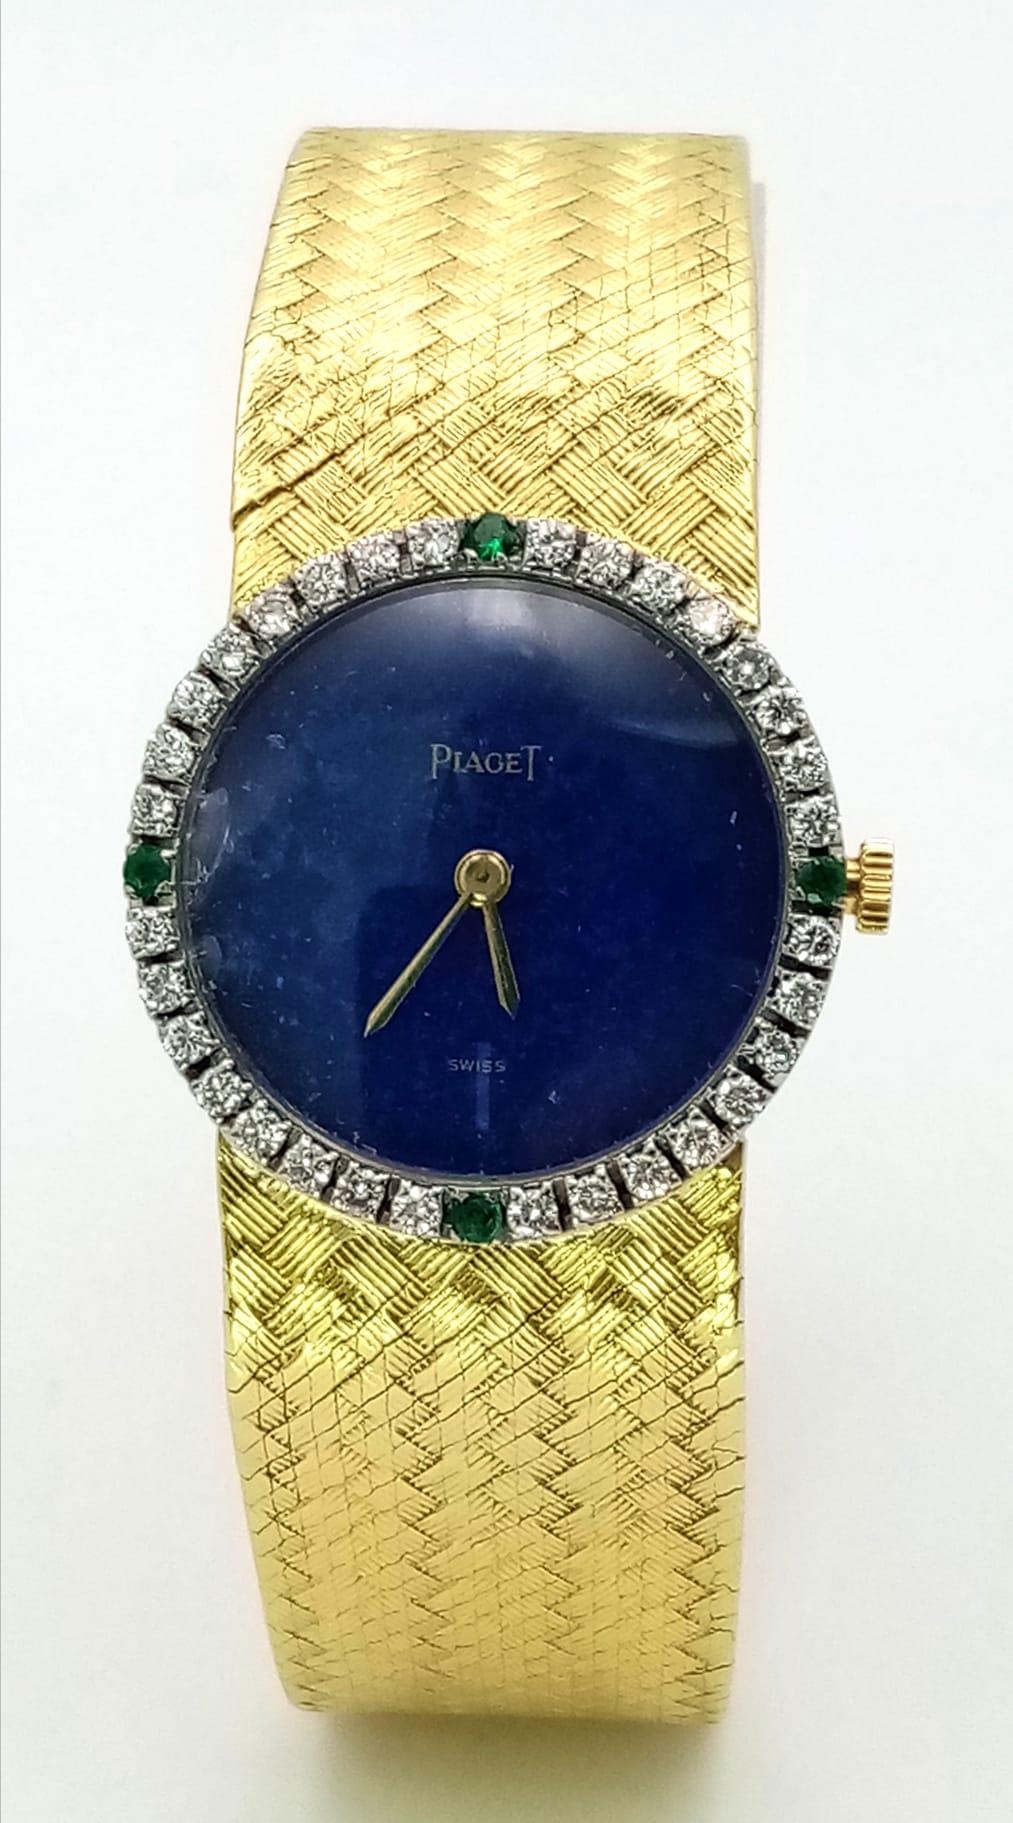 Vintage Ladies Piaget 18ct yellow gold watch, with a lapis lazuli dial (22mm) accented with a